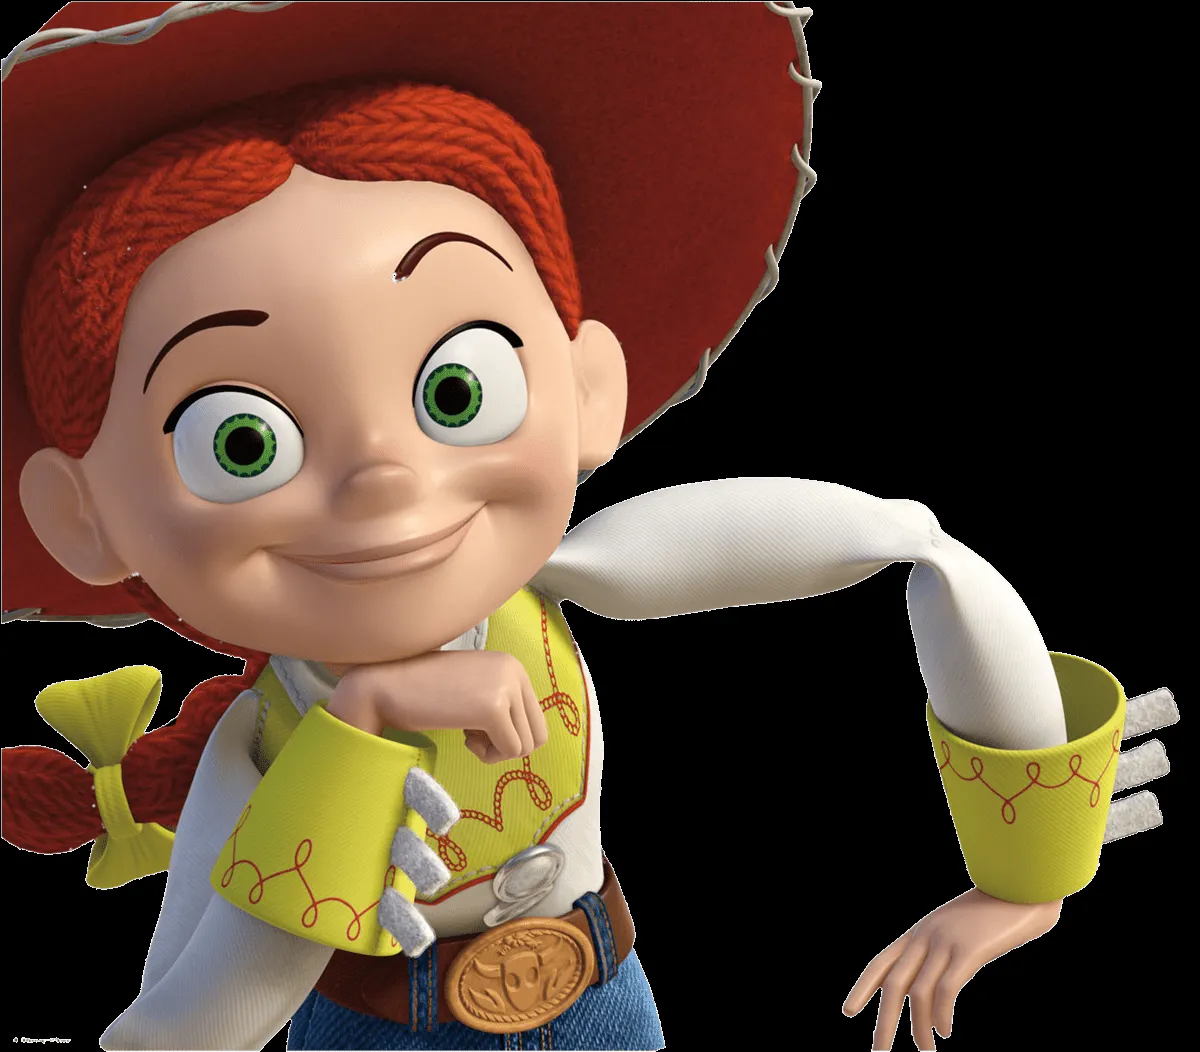 Image - Jessie from toy story 2.png - DisneyWiki